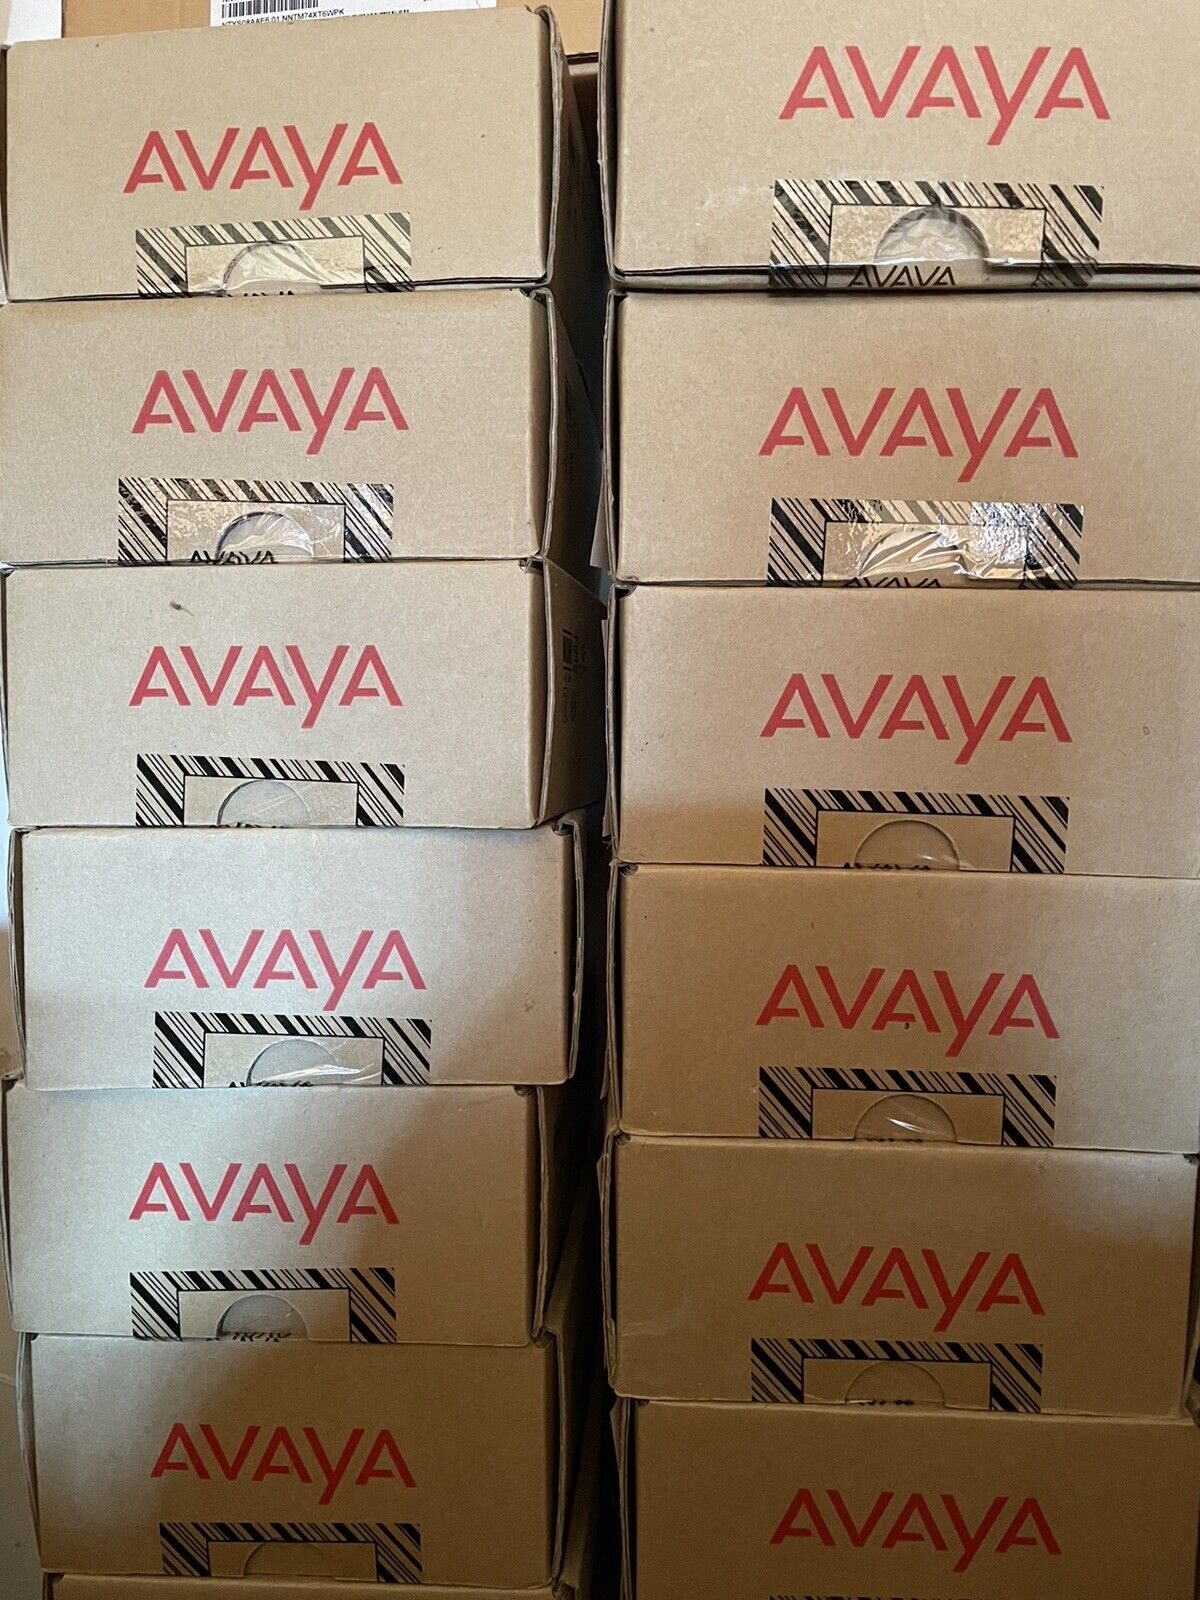 Avaya Wedge Stand for 9608/9611G/9620/9620C IP Phones (700383870) New, Sealed